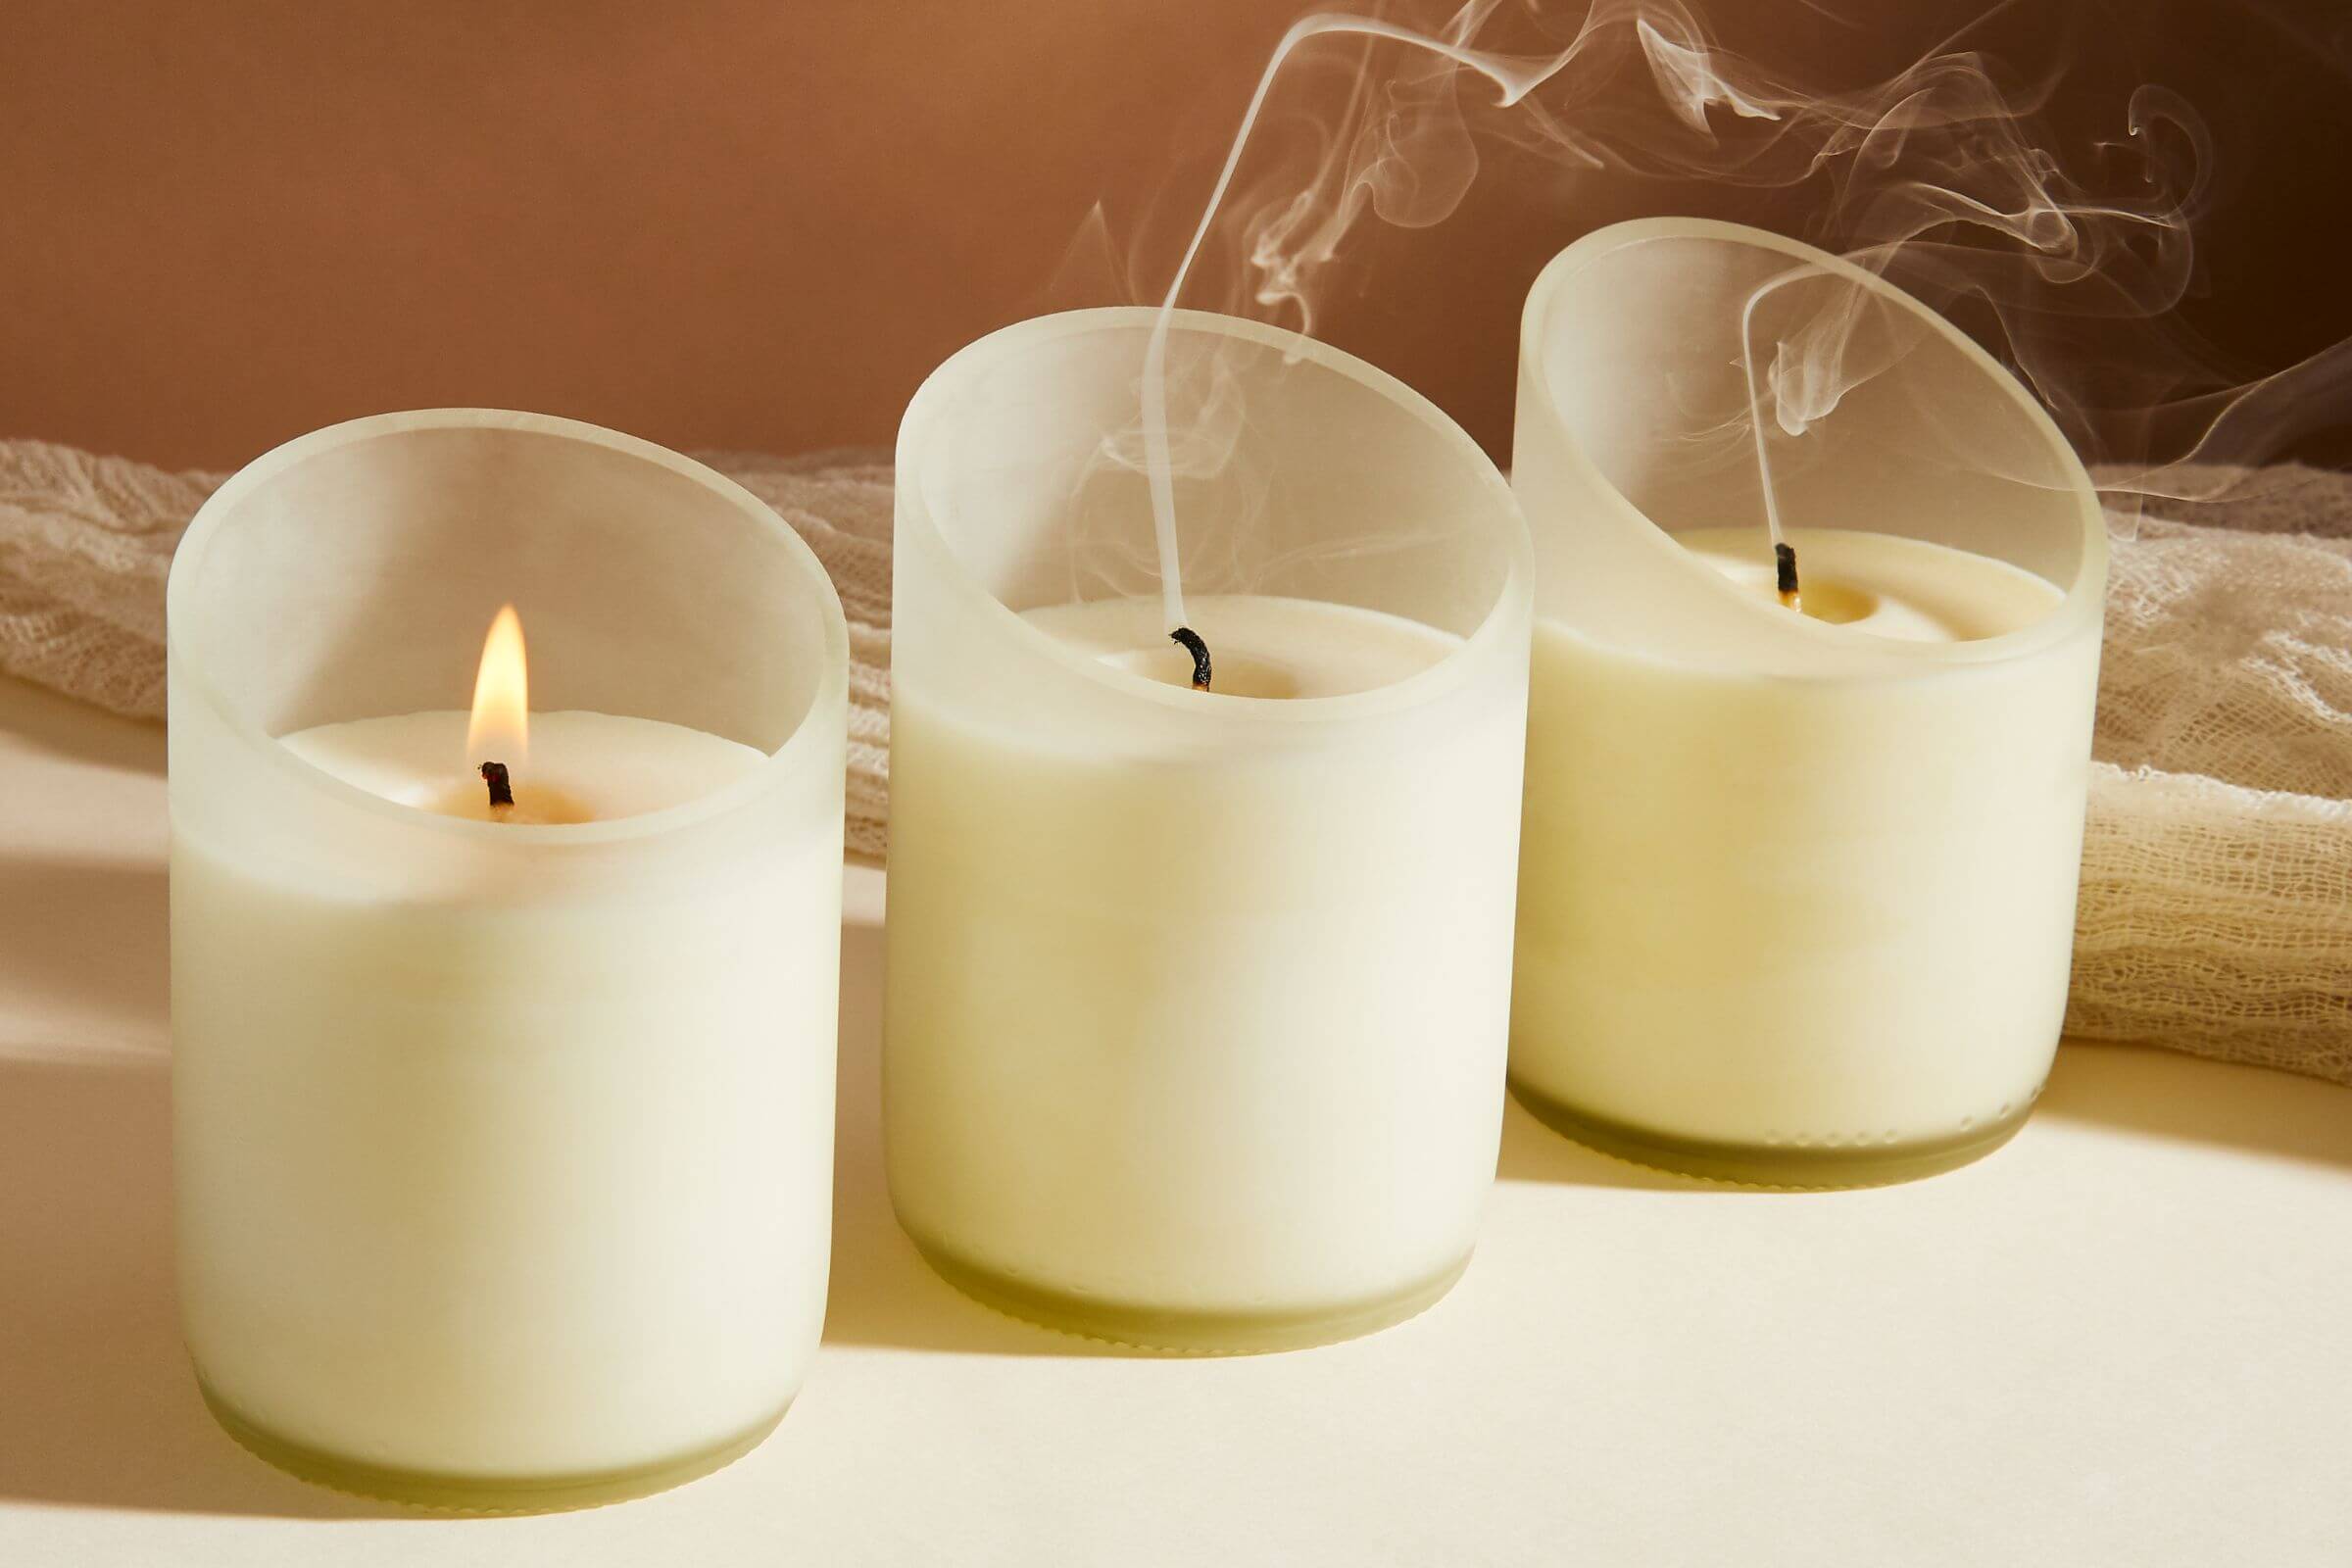 Six Natural Soy Wax Tea Light Candles, Fragranced With Pure